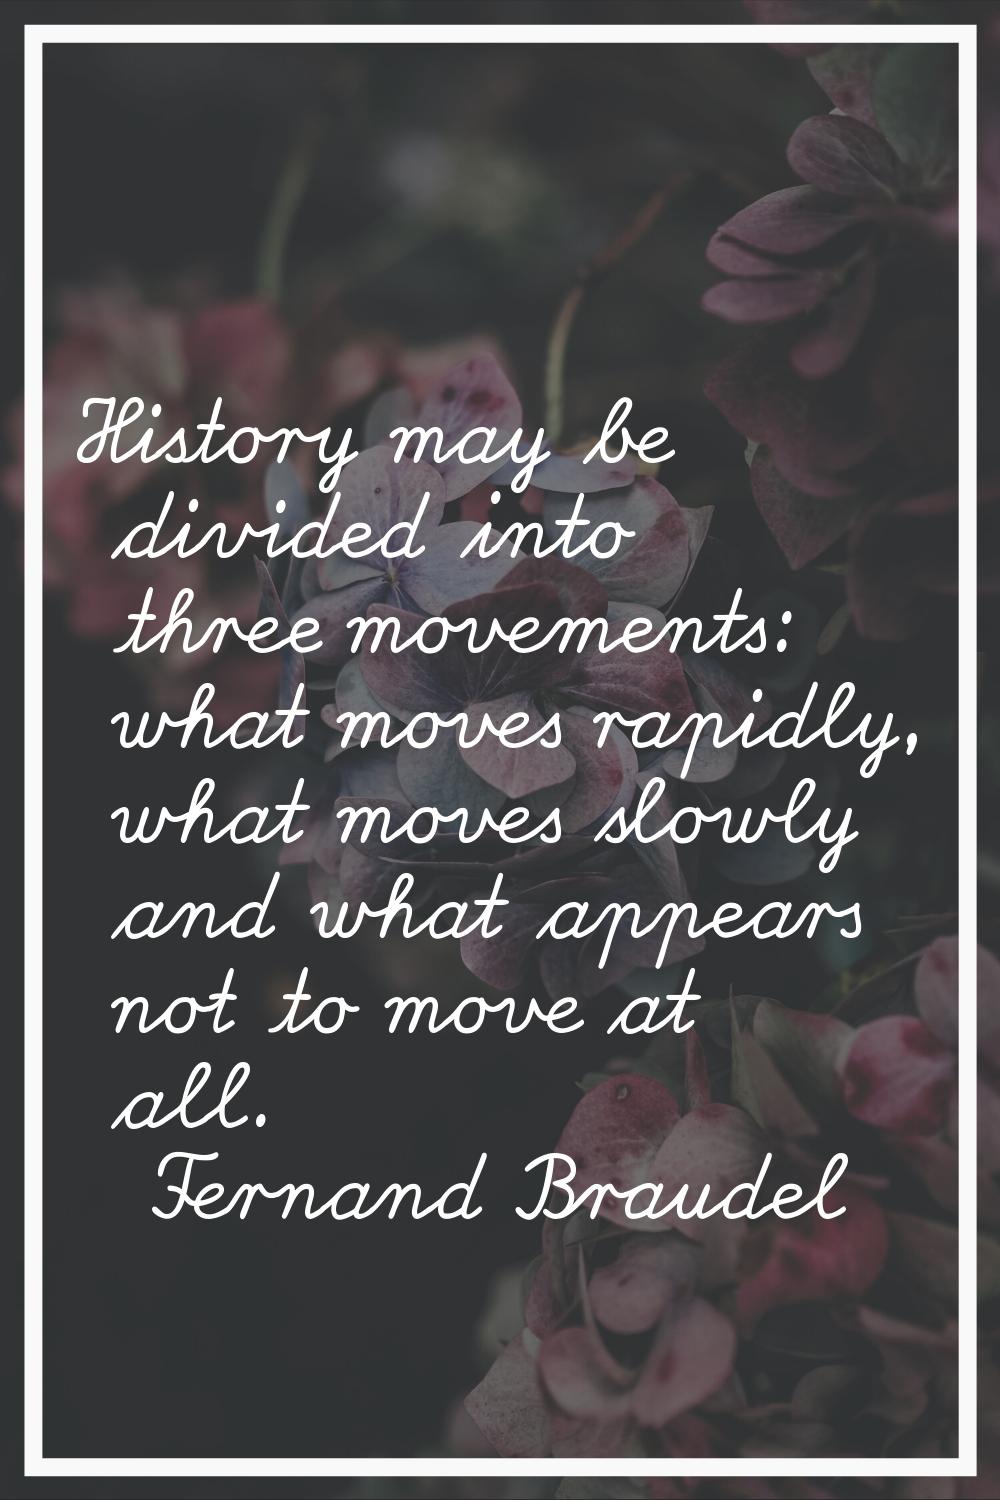 History may be divided into three movements: what moves rapidly, what moves slowly and what appears